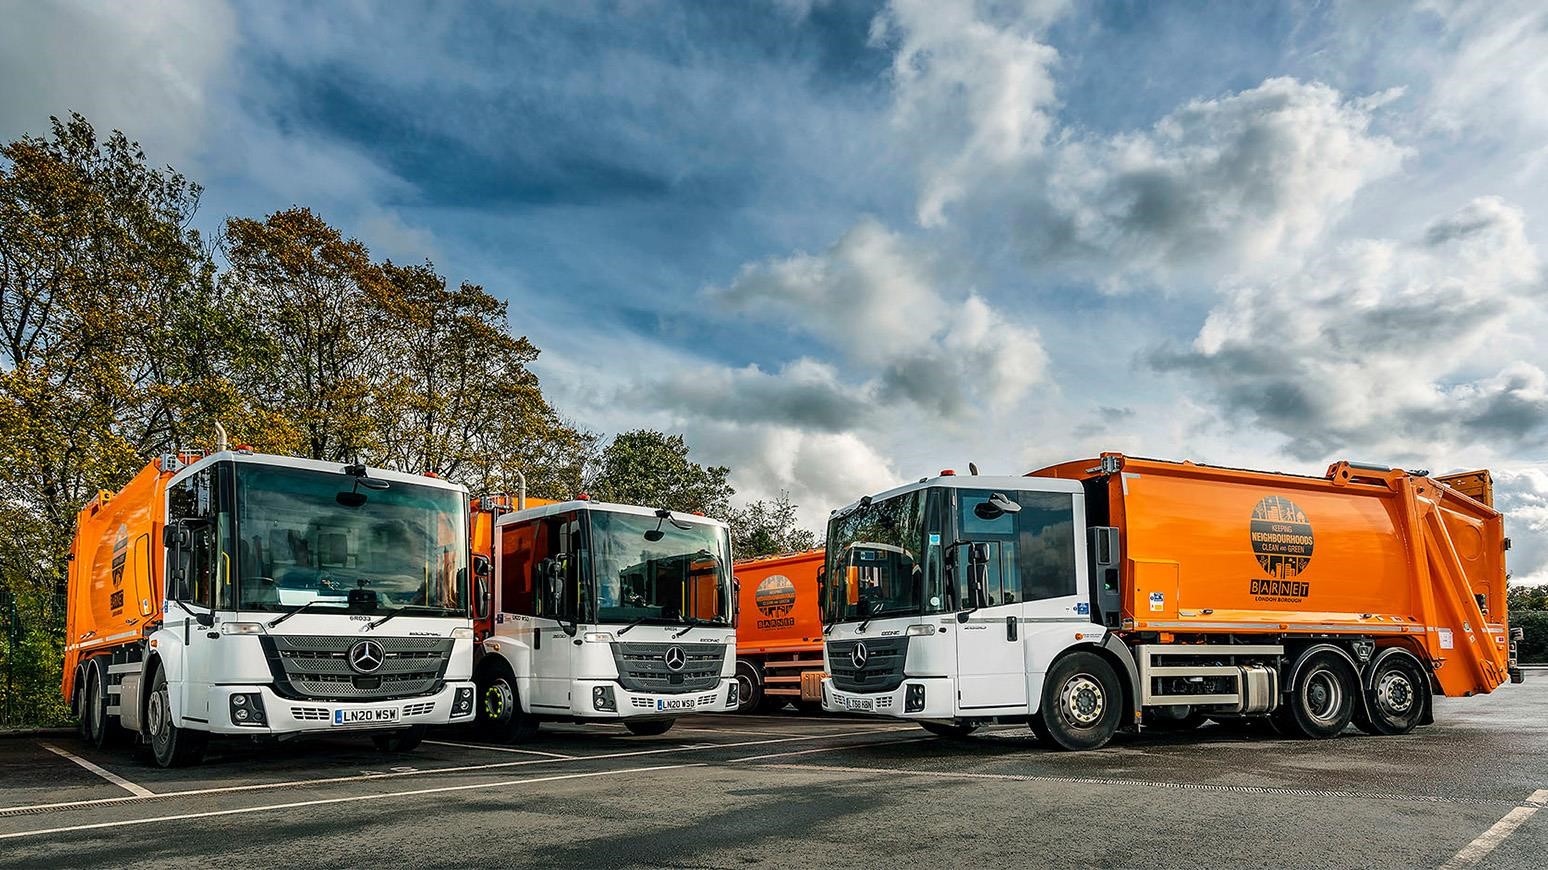 Barnet Council Continues To Update Its Fleet With Mercedes-Benz Econic 2630L Refuse Trucks